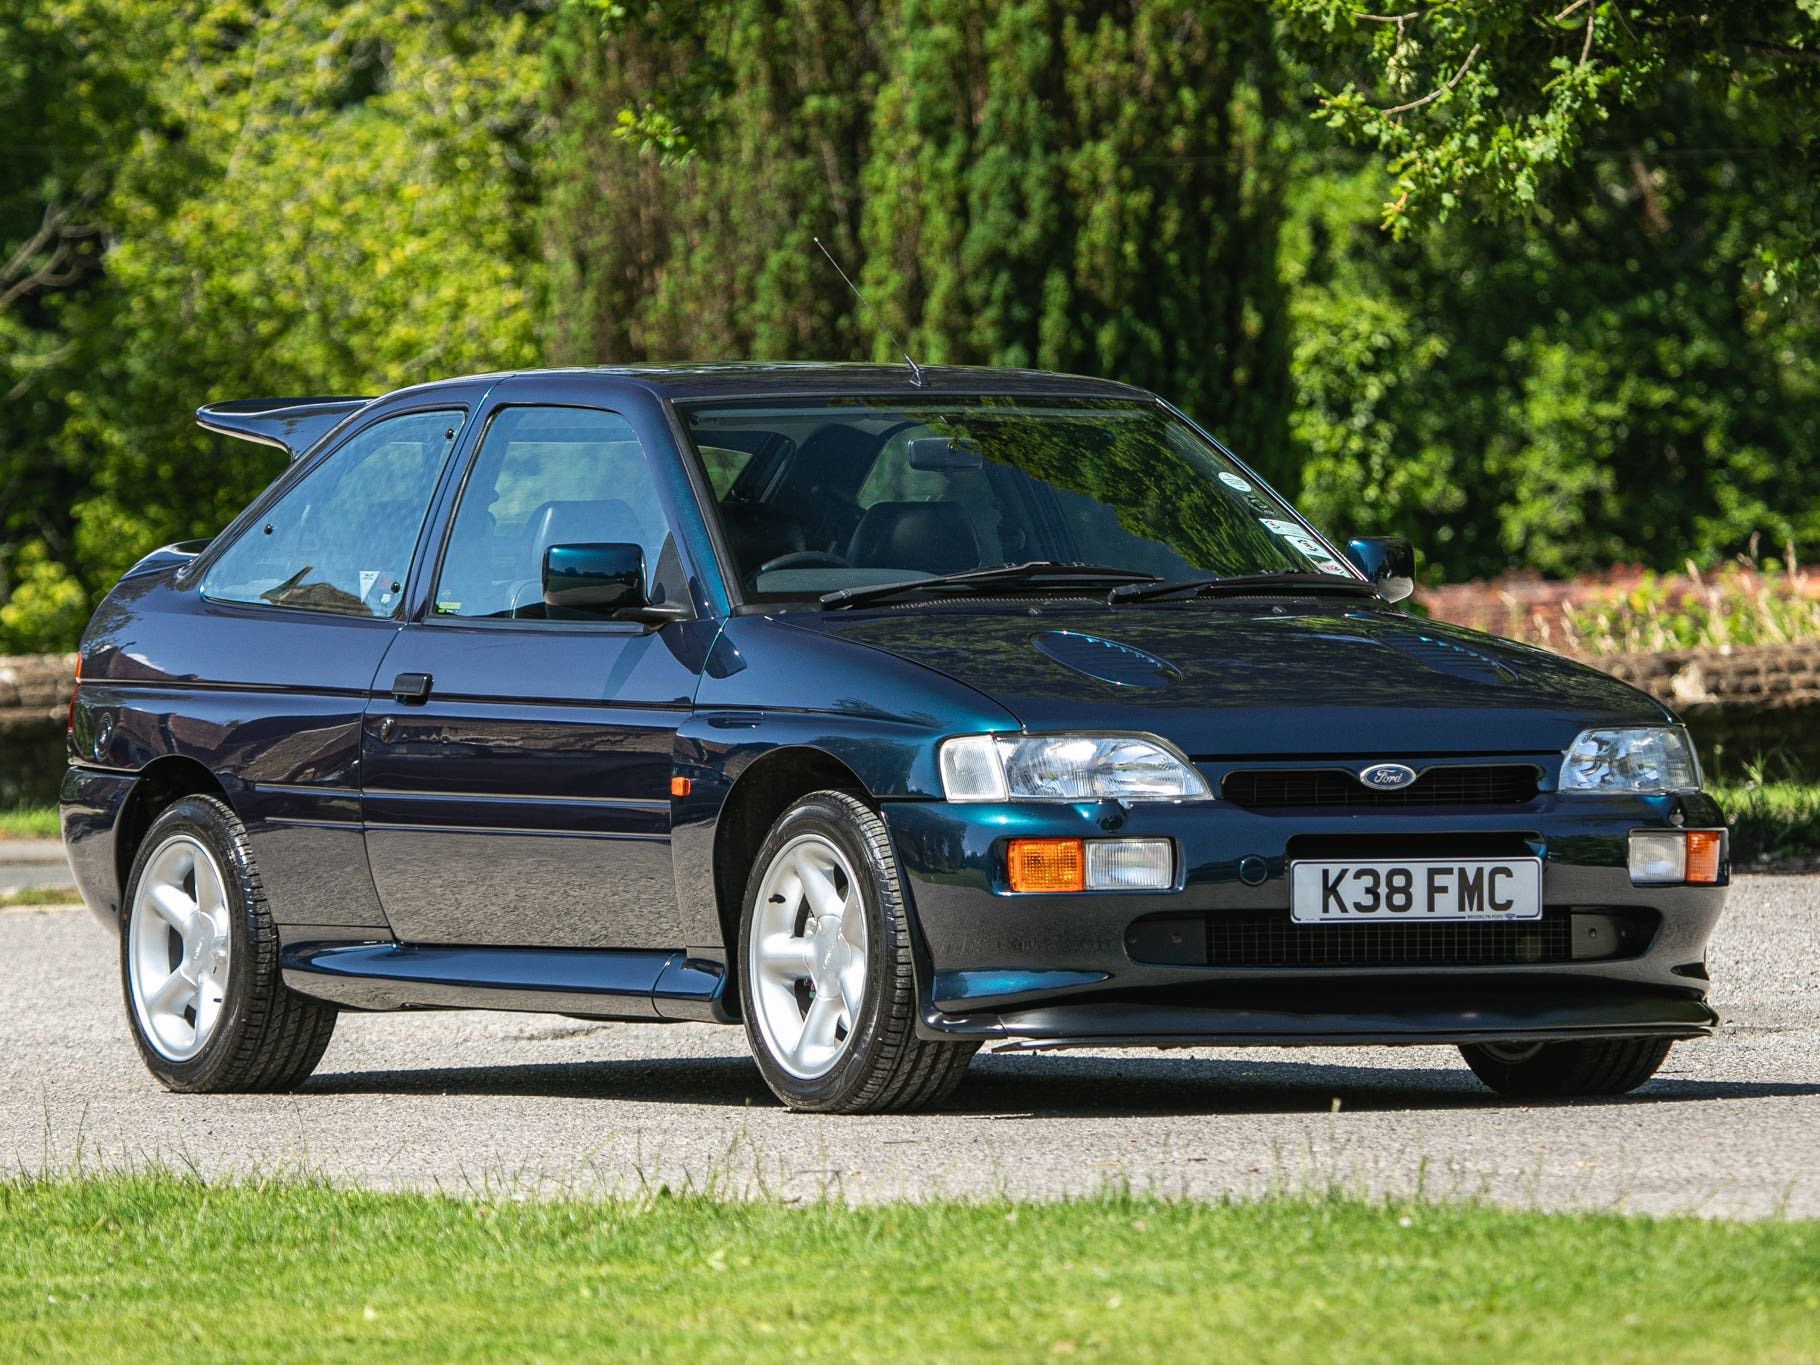 Jeremy Clarkson’s Ford Escort RS Cosworth could fetch £75,000 at auction